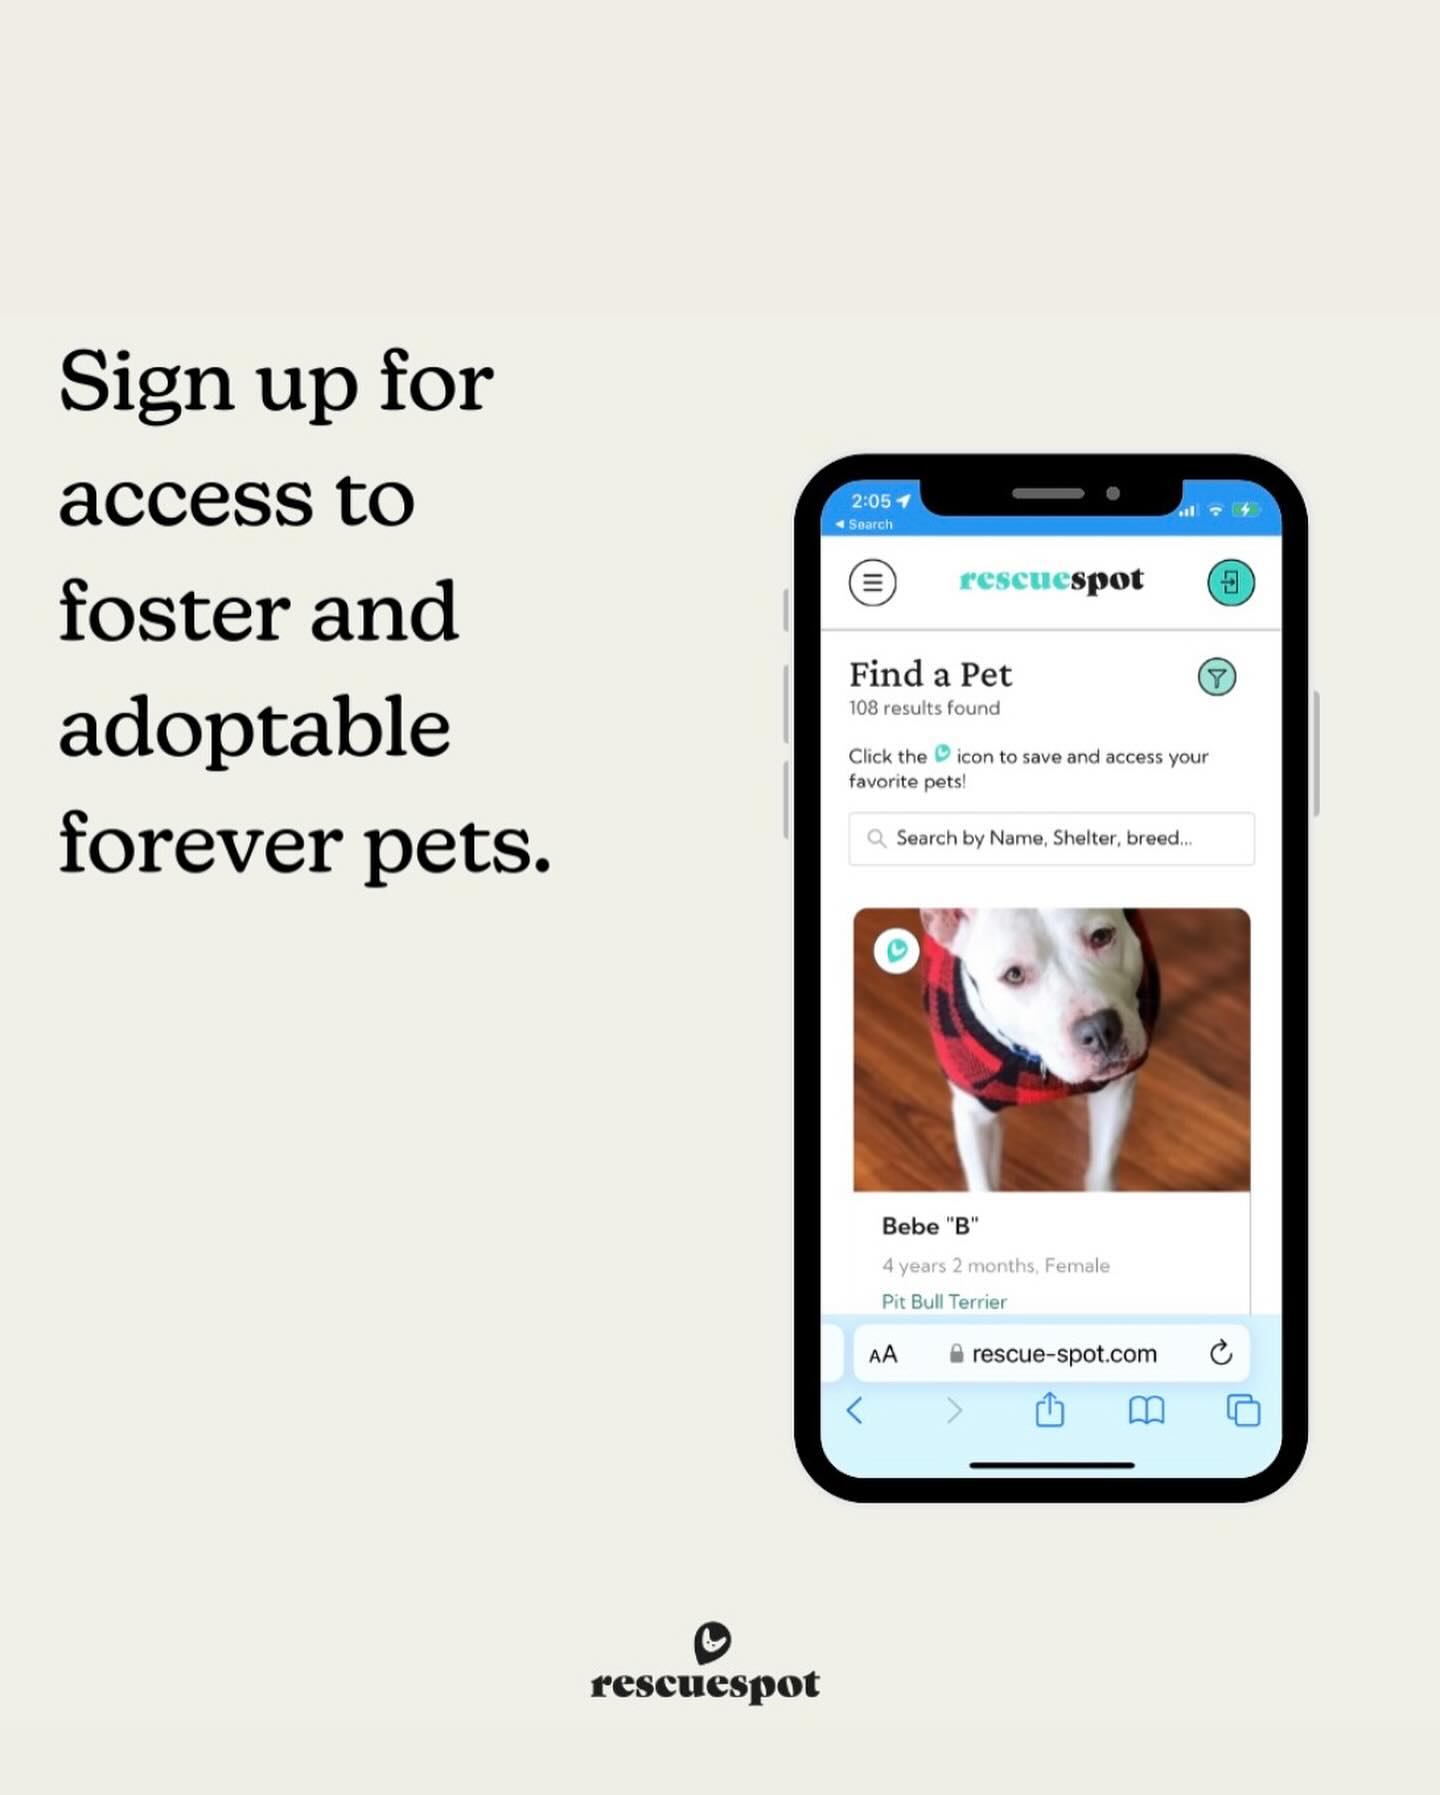 Ready for another busy year with @rescue_spot 🐾🐕 
.
@rescue_spot is game-changing platform dedicated to simplifying and streamlining the pet adoption & fostering process. 
.
We are the only platform that displays fosterable pets and that allows adopters to apply for multiple pets instantly from different shelters- with just a one-time application!
.
We provide total shelter management for rescues and shelters, drastically cutting down on the time spent searching & vetting for fosters, freeing up time for rescues to care for their animals❤️
.
Our mission at Rescue Spot is close to my heart, fueled by the belief that we can end the heartbreaking necessity of euthanasia due to overcrowded shelters. We’re working towards a future where pets find their forever homes or loving foster families faster, and shelters are no longer overwhelmed.
.
It’s been 4 years (almost to the day!) since I adopted my pup River from the dog meat trade in Korea. Apart from being the best thing to ever happen to me, he is a testament to the transformative power of adoption and fostering.
.
Follow @rescue_spot to stay updated on the latest adoptable pets, ask any questions you may have about adopting or fostering, and be part of our in-person adoption events this year 🎉 (see my story highlights for more info) 
#RescueSpot #AdoptDontShop